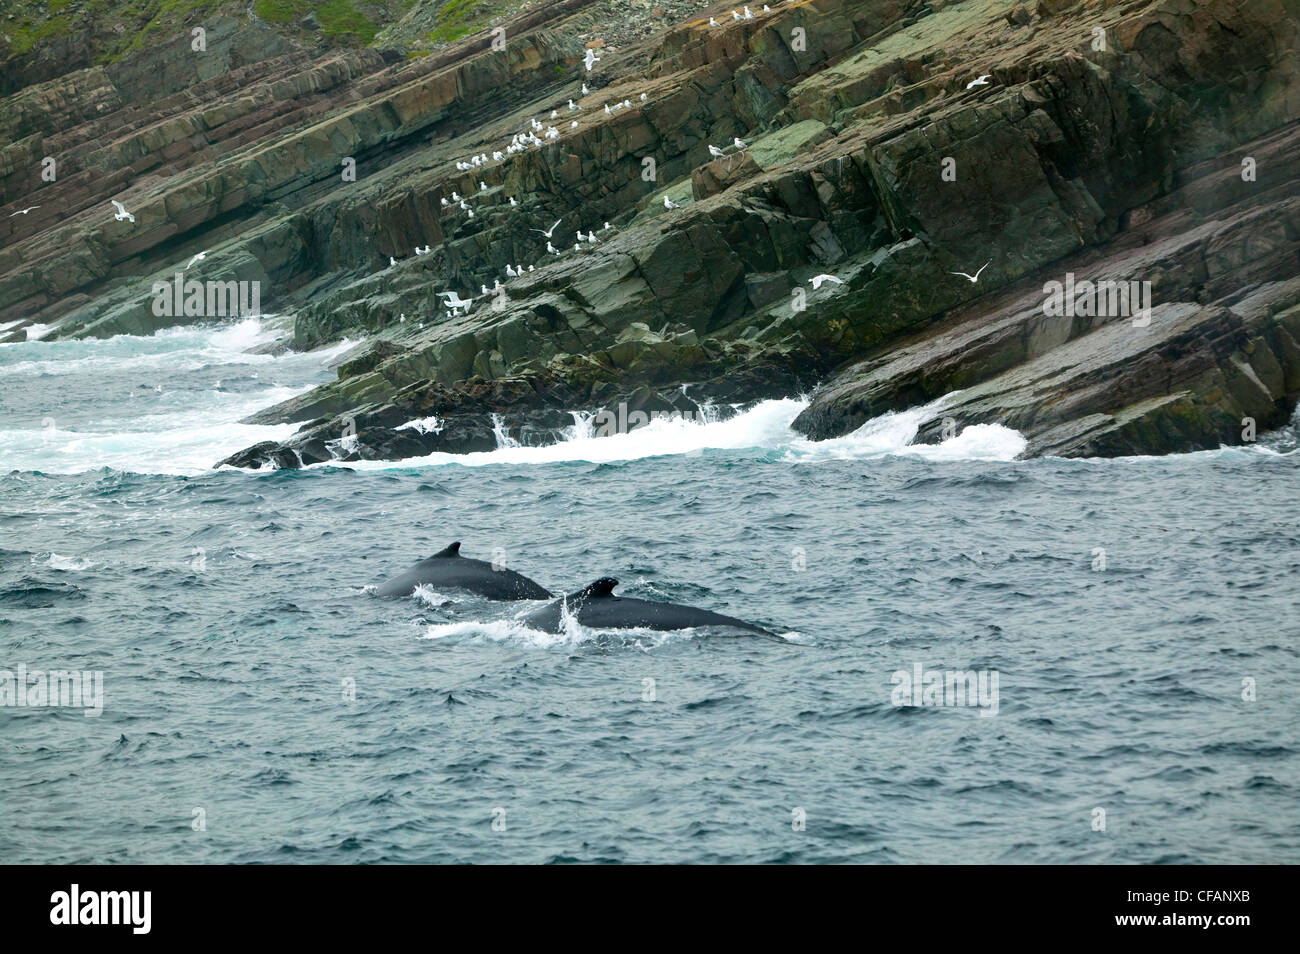 Two breaching Humpback Whales (Megaptera novaeangliae) in Witless Bay Ecological Reserve, Newfoundland and Labrador, Canada. Stock Photo